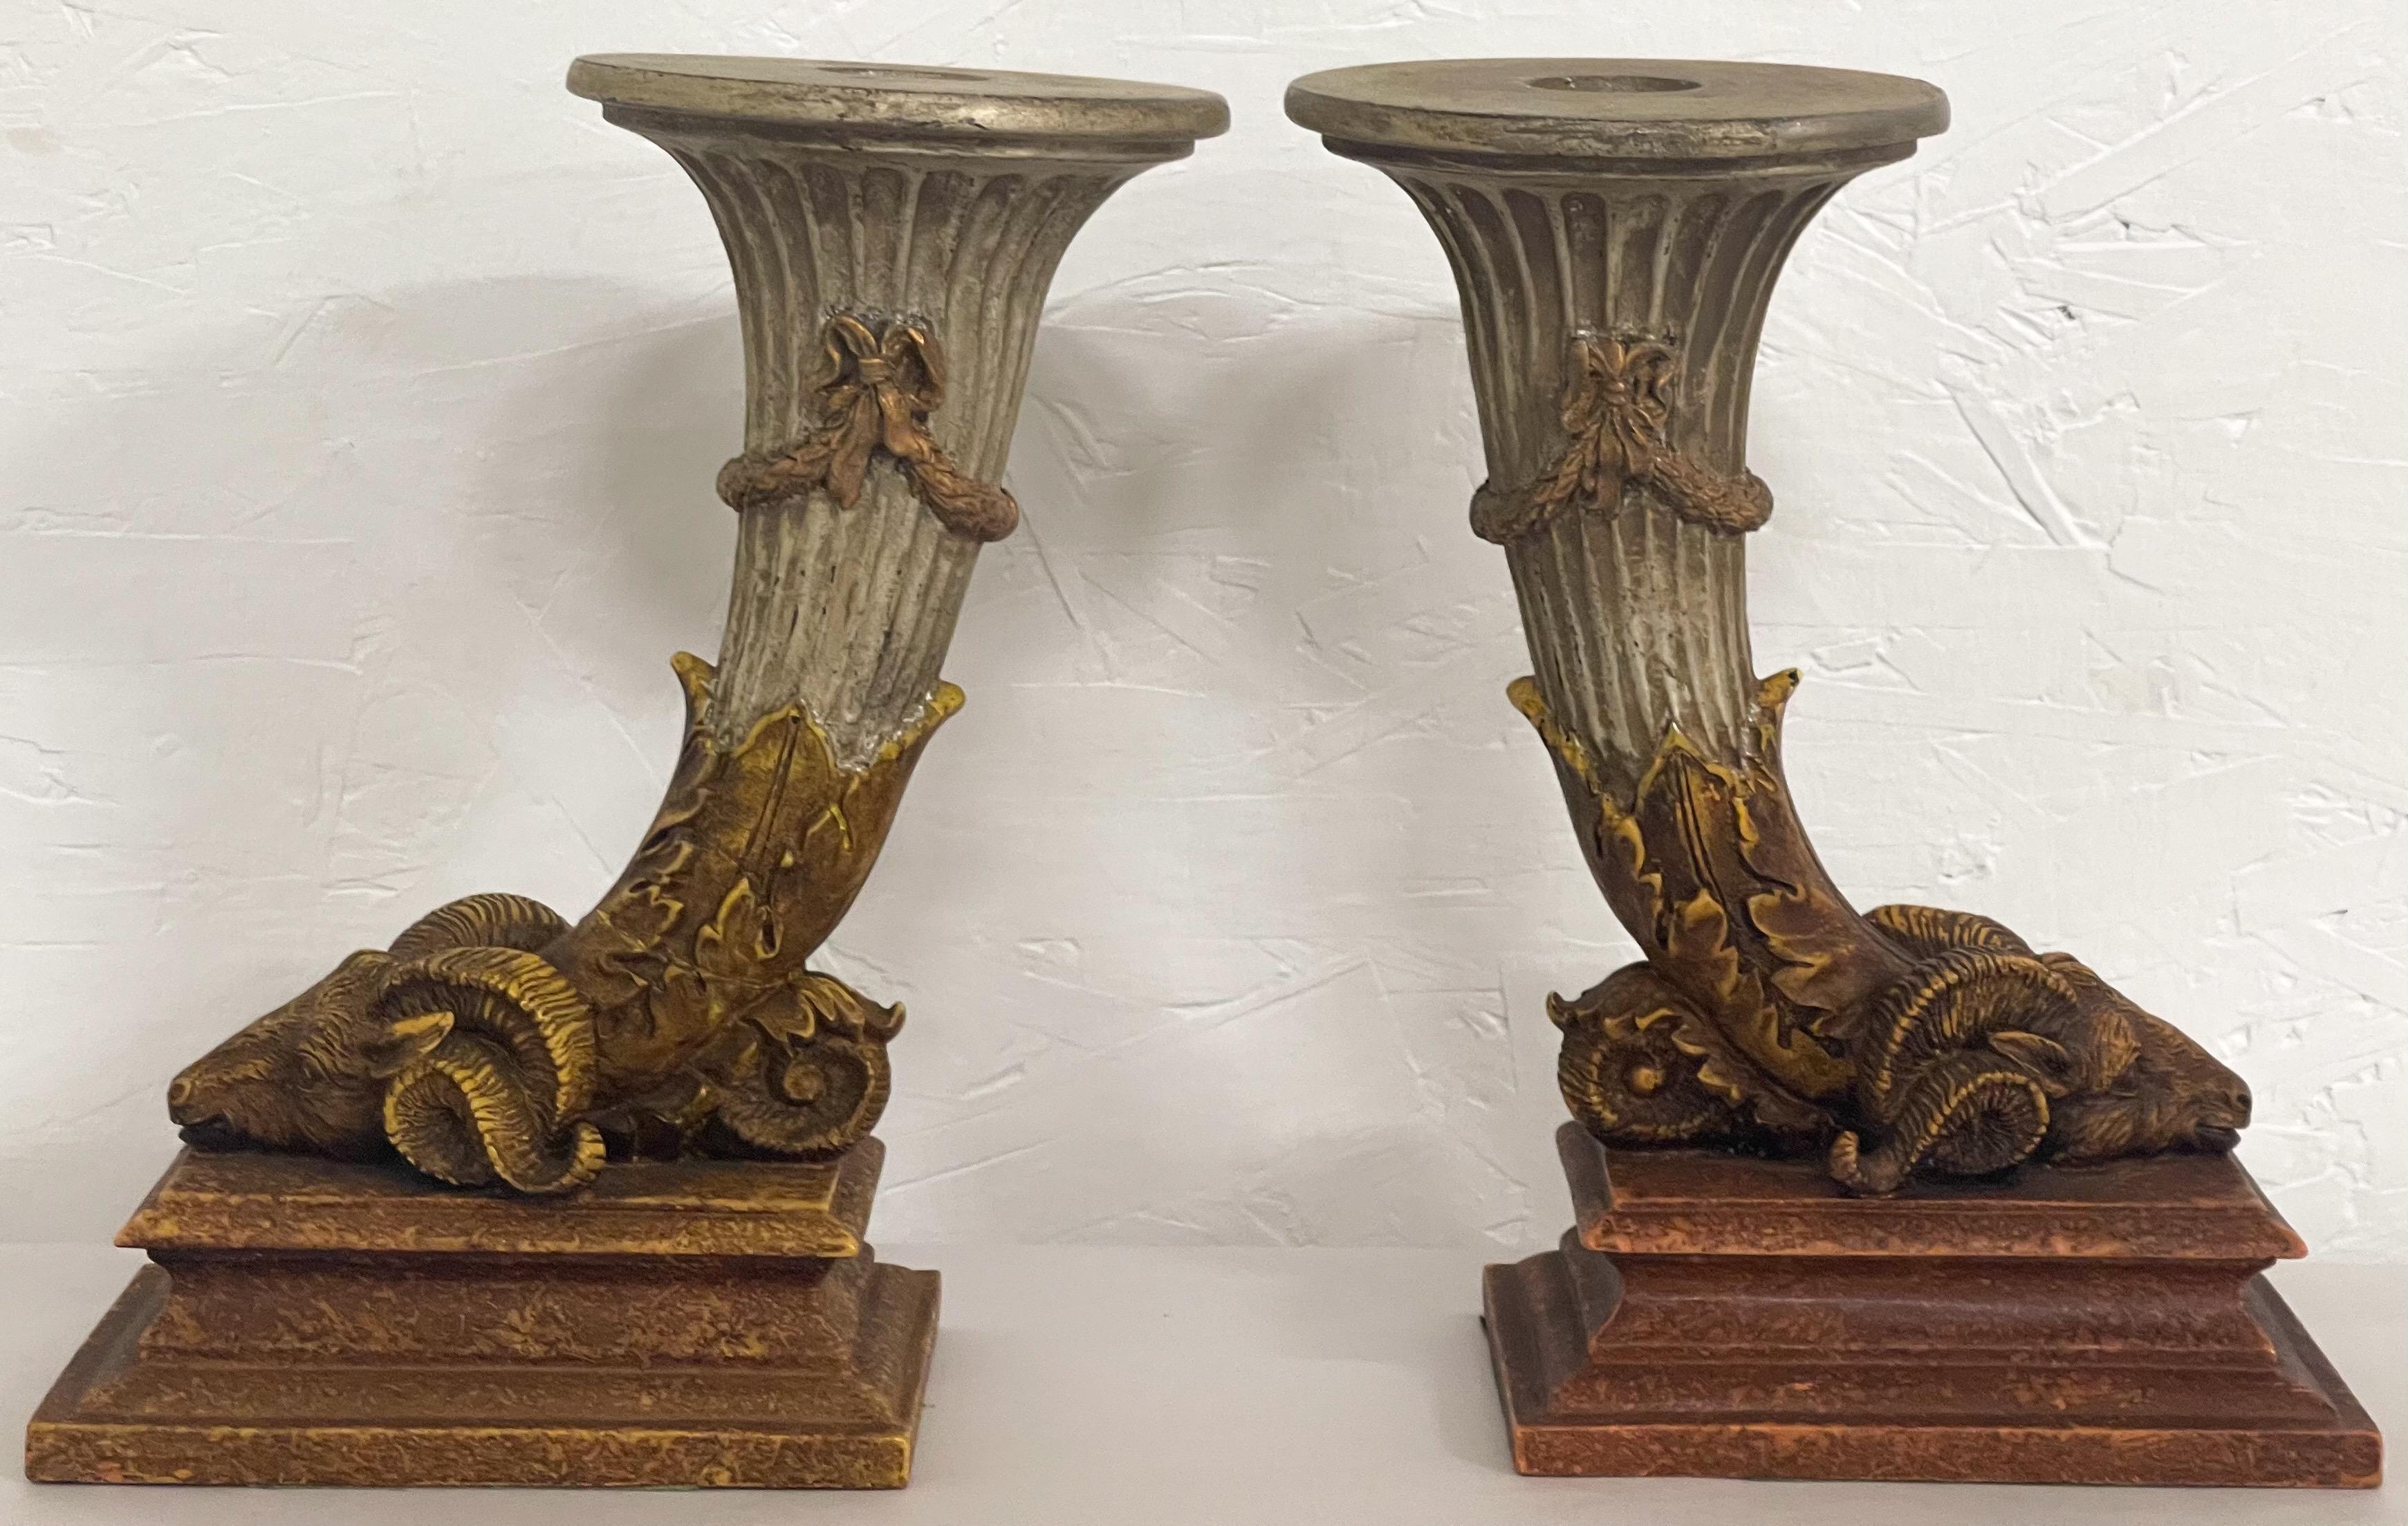 This is a good looking pair of Italian neo-classical style candlesticks. They have an elongated cornucopia that graduates downward to a detailed ram’s head. They are composition and most likely Italian.